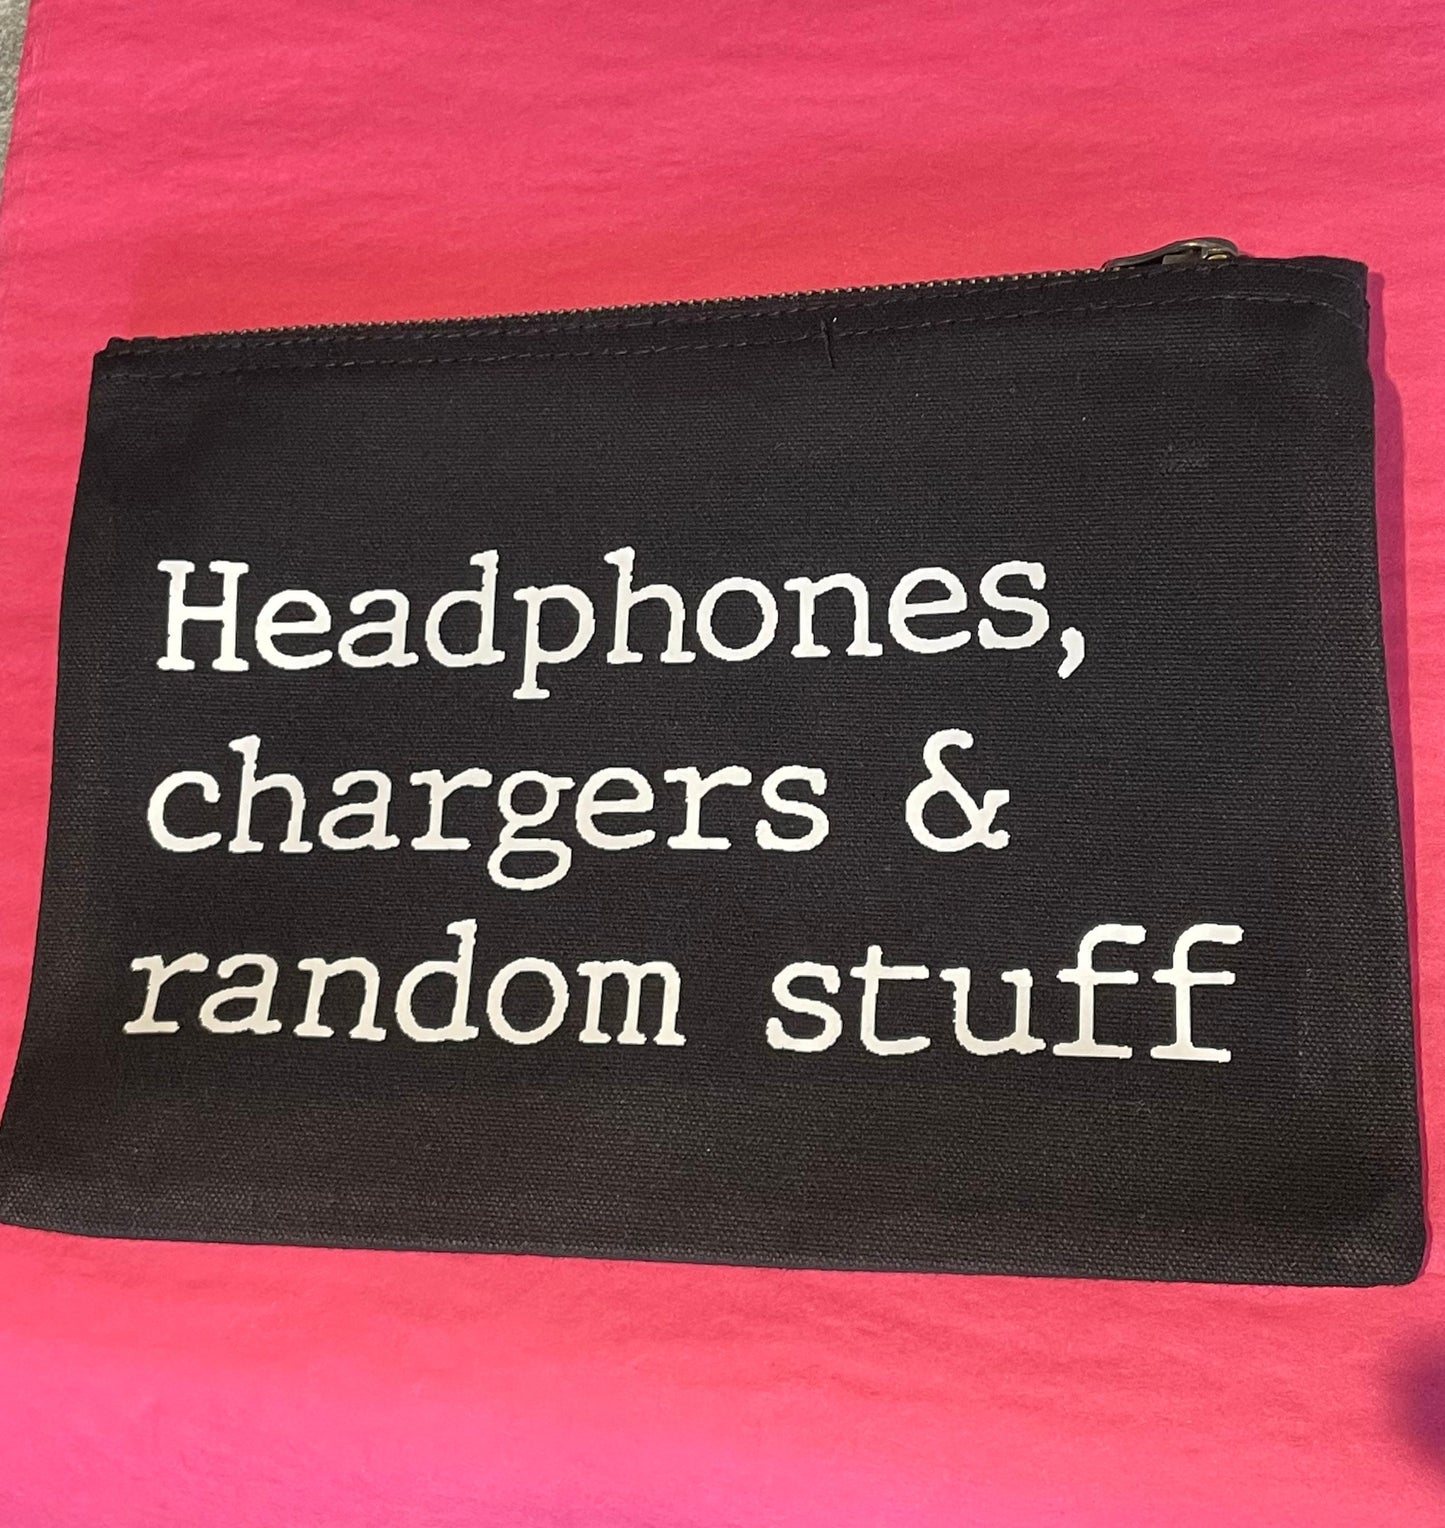 Headphone case, Chargers and cables bag, personalised charger pouch, dad gift for Father’s Day, men birthday present, daddy presents